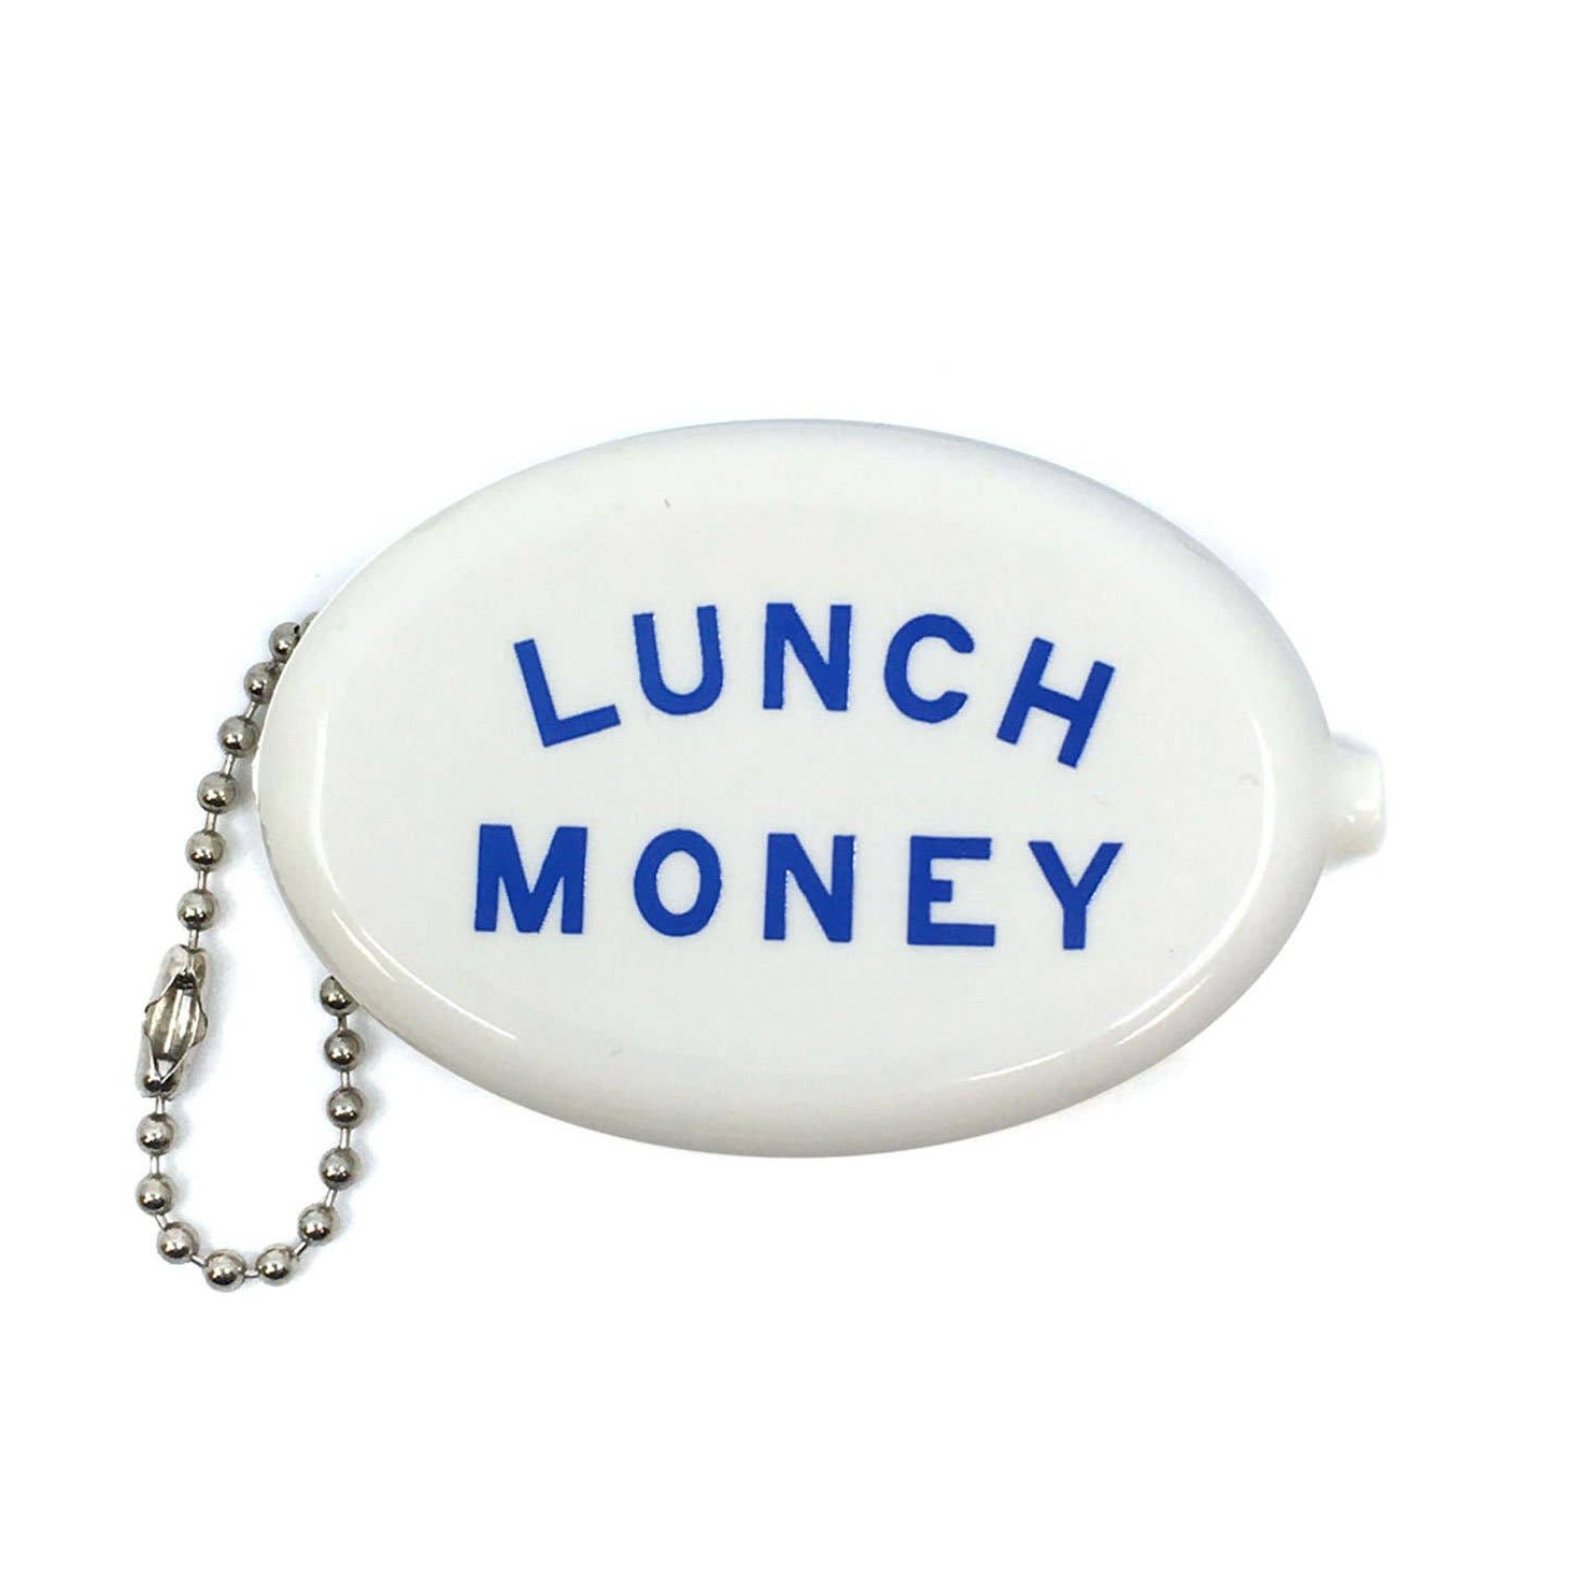 lunch money: coin pouch